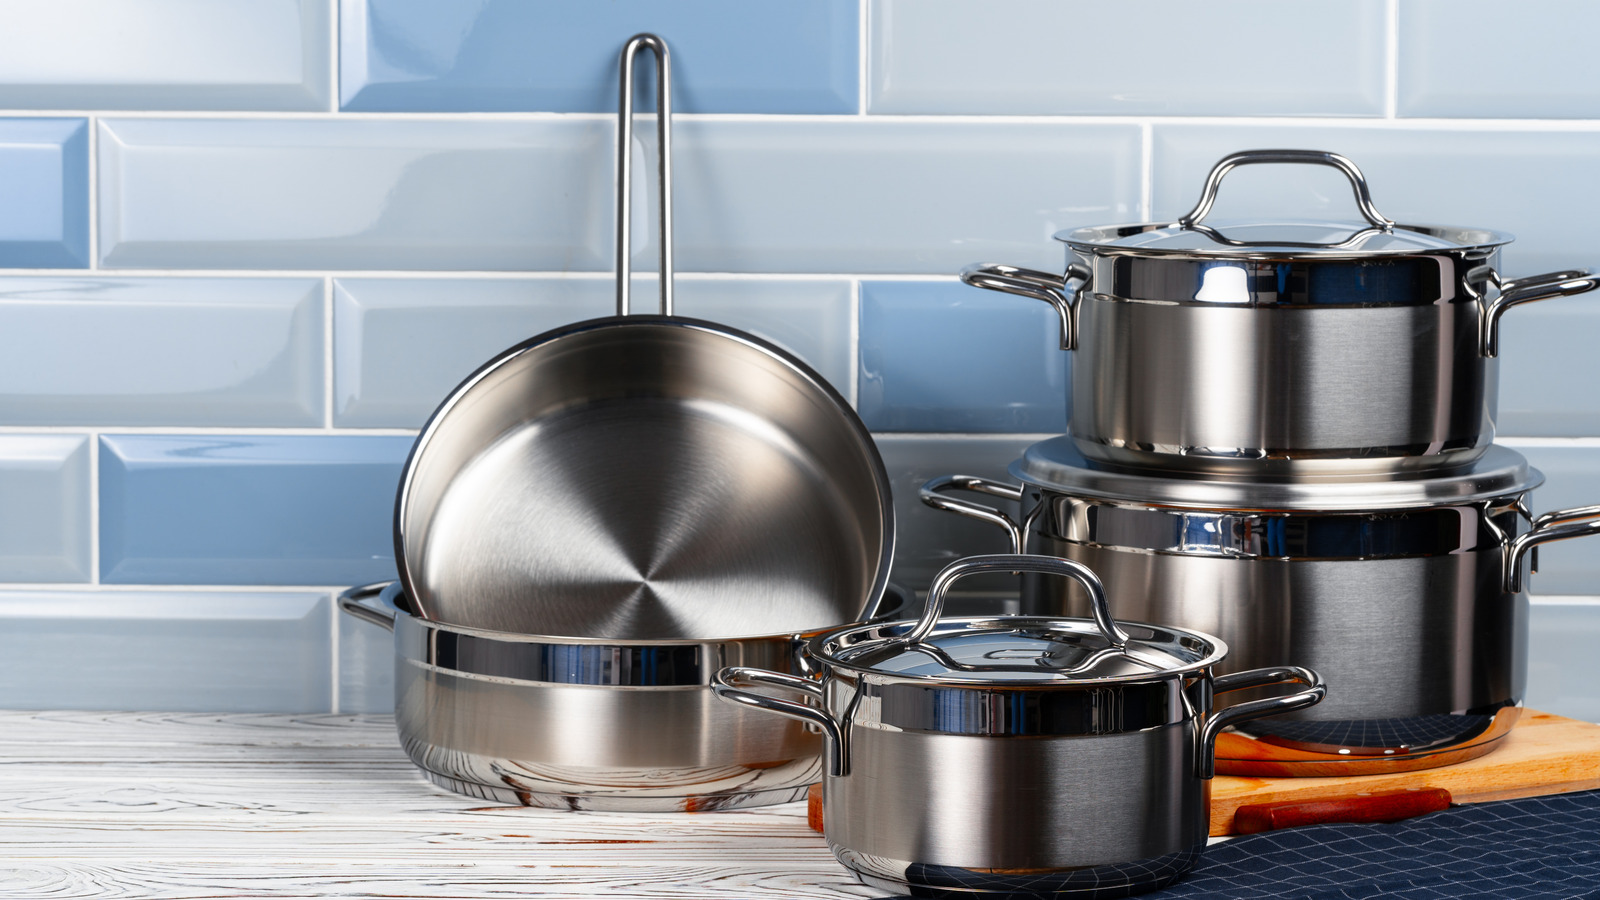 T-fal vs. Calphalon: How Does Their Cookware Compare? - Prudent